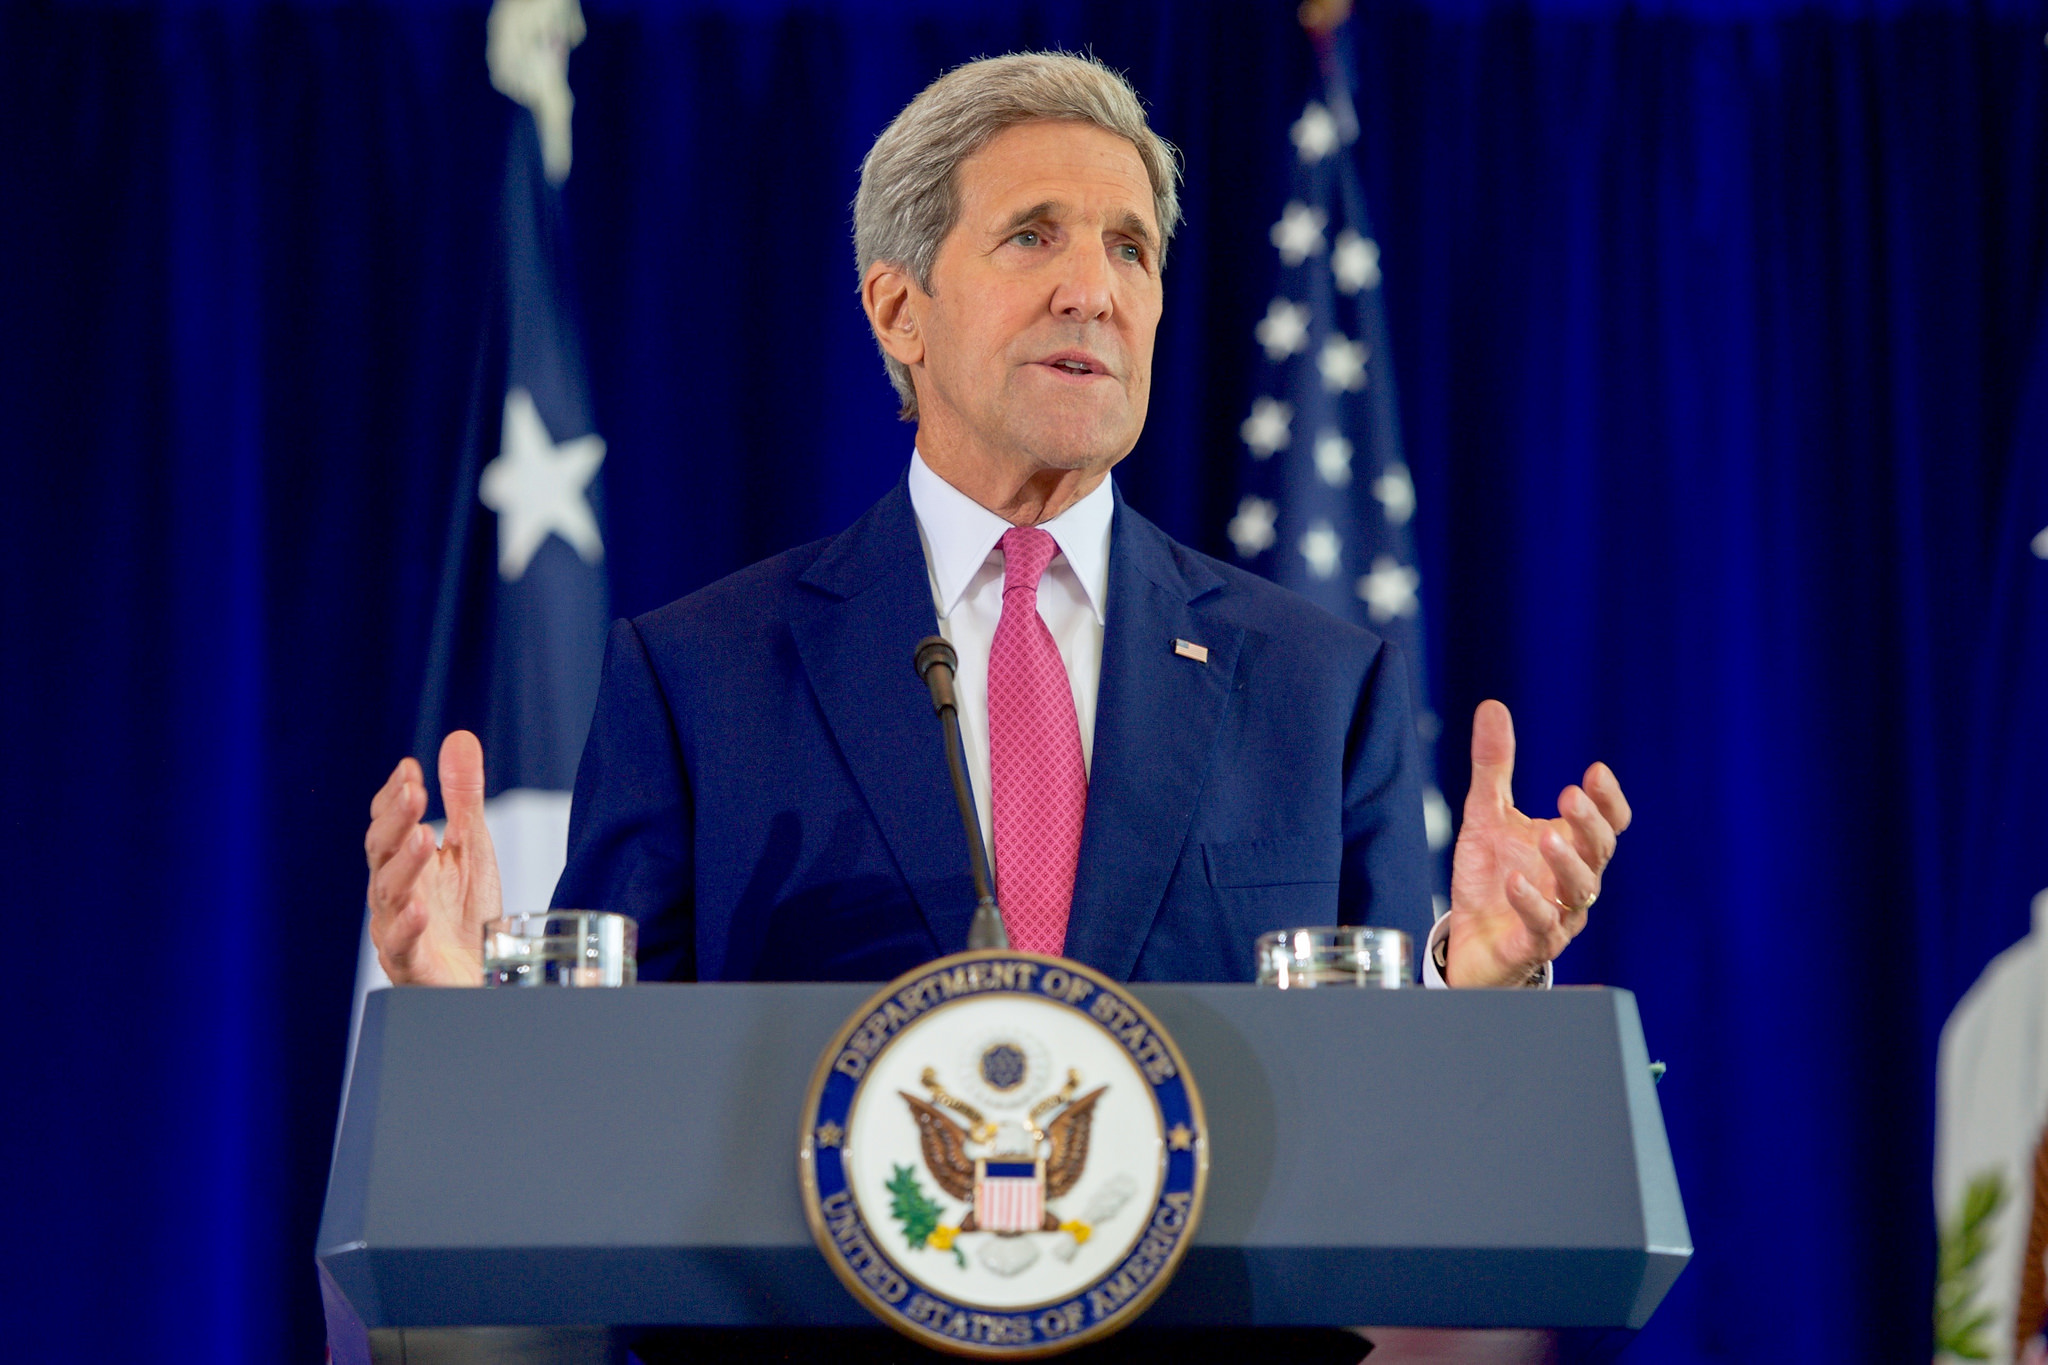 What to expect from U.S. Secretary of State John Kerry’s trip to the Middle East this week